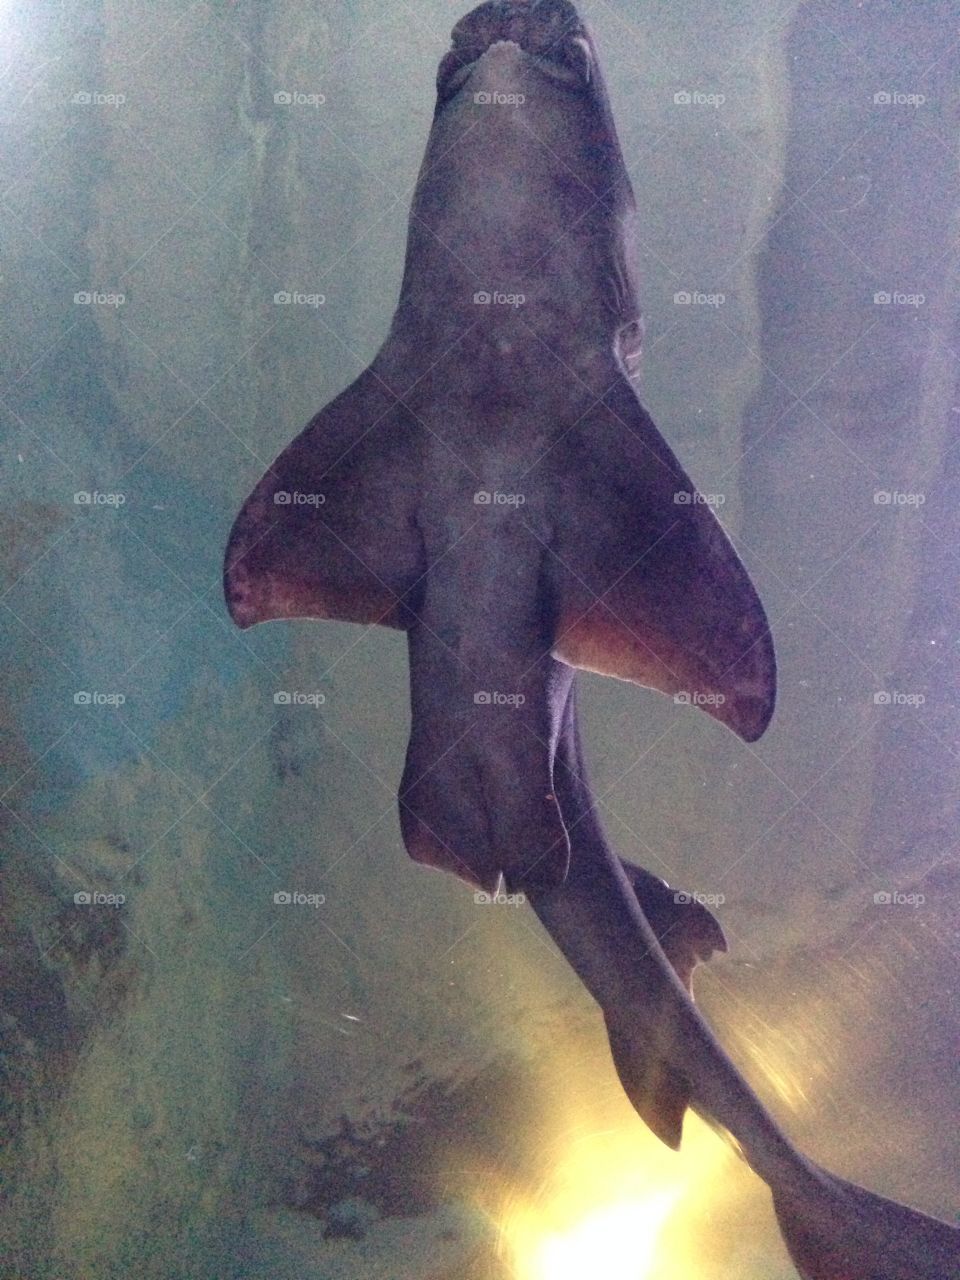 Upwards view showing beneath a shark as it swims above in its waters